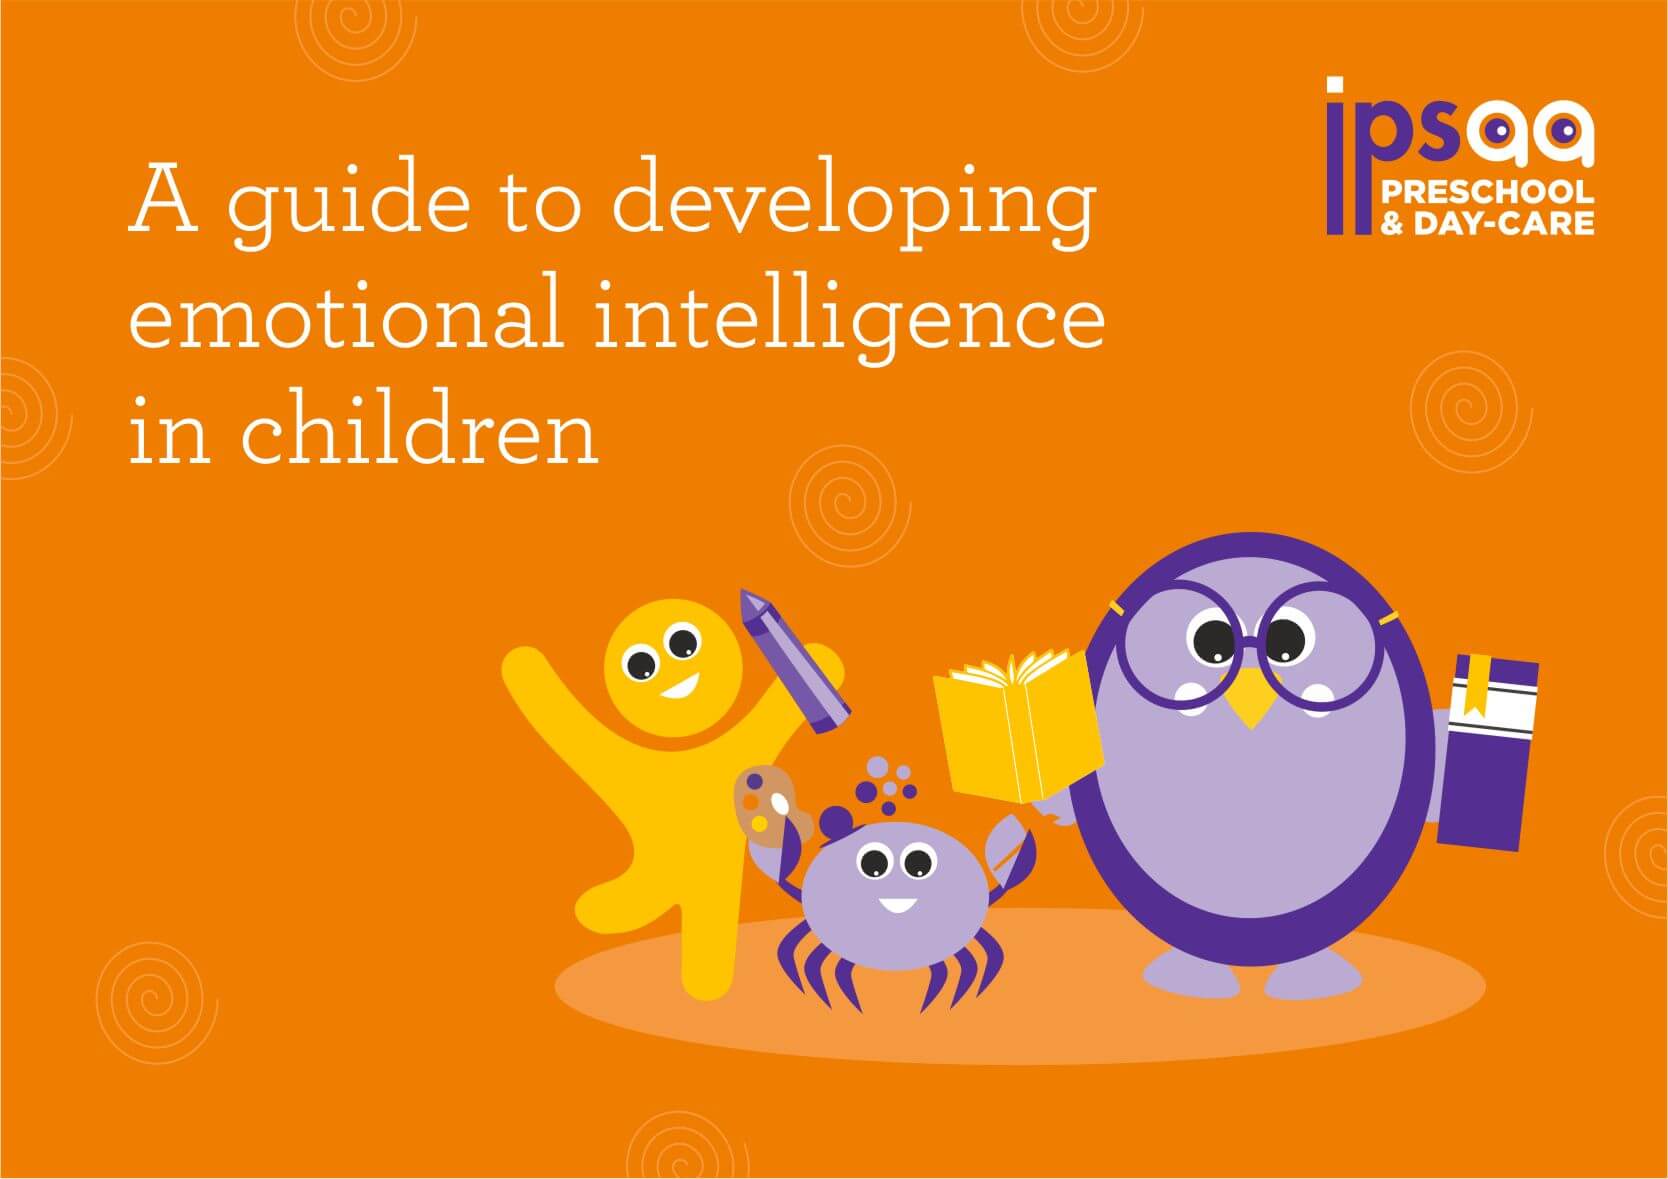 A guide to developing emotional intelligence in children